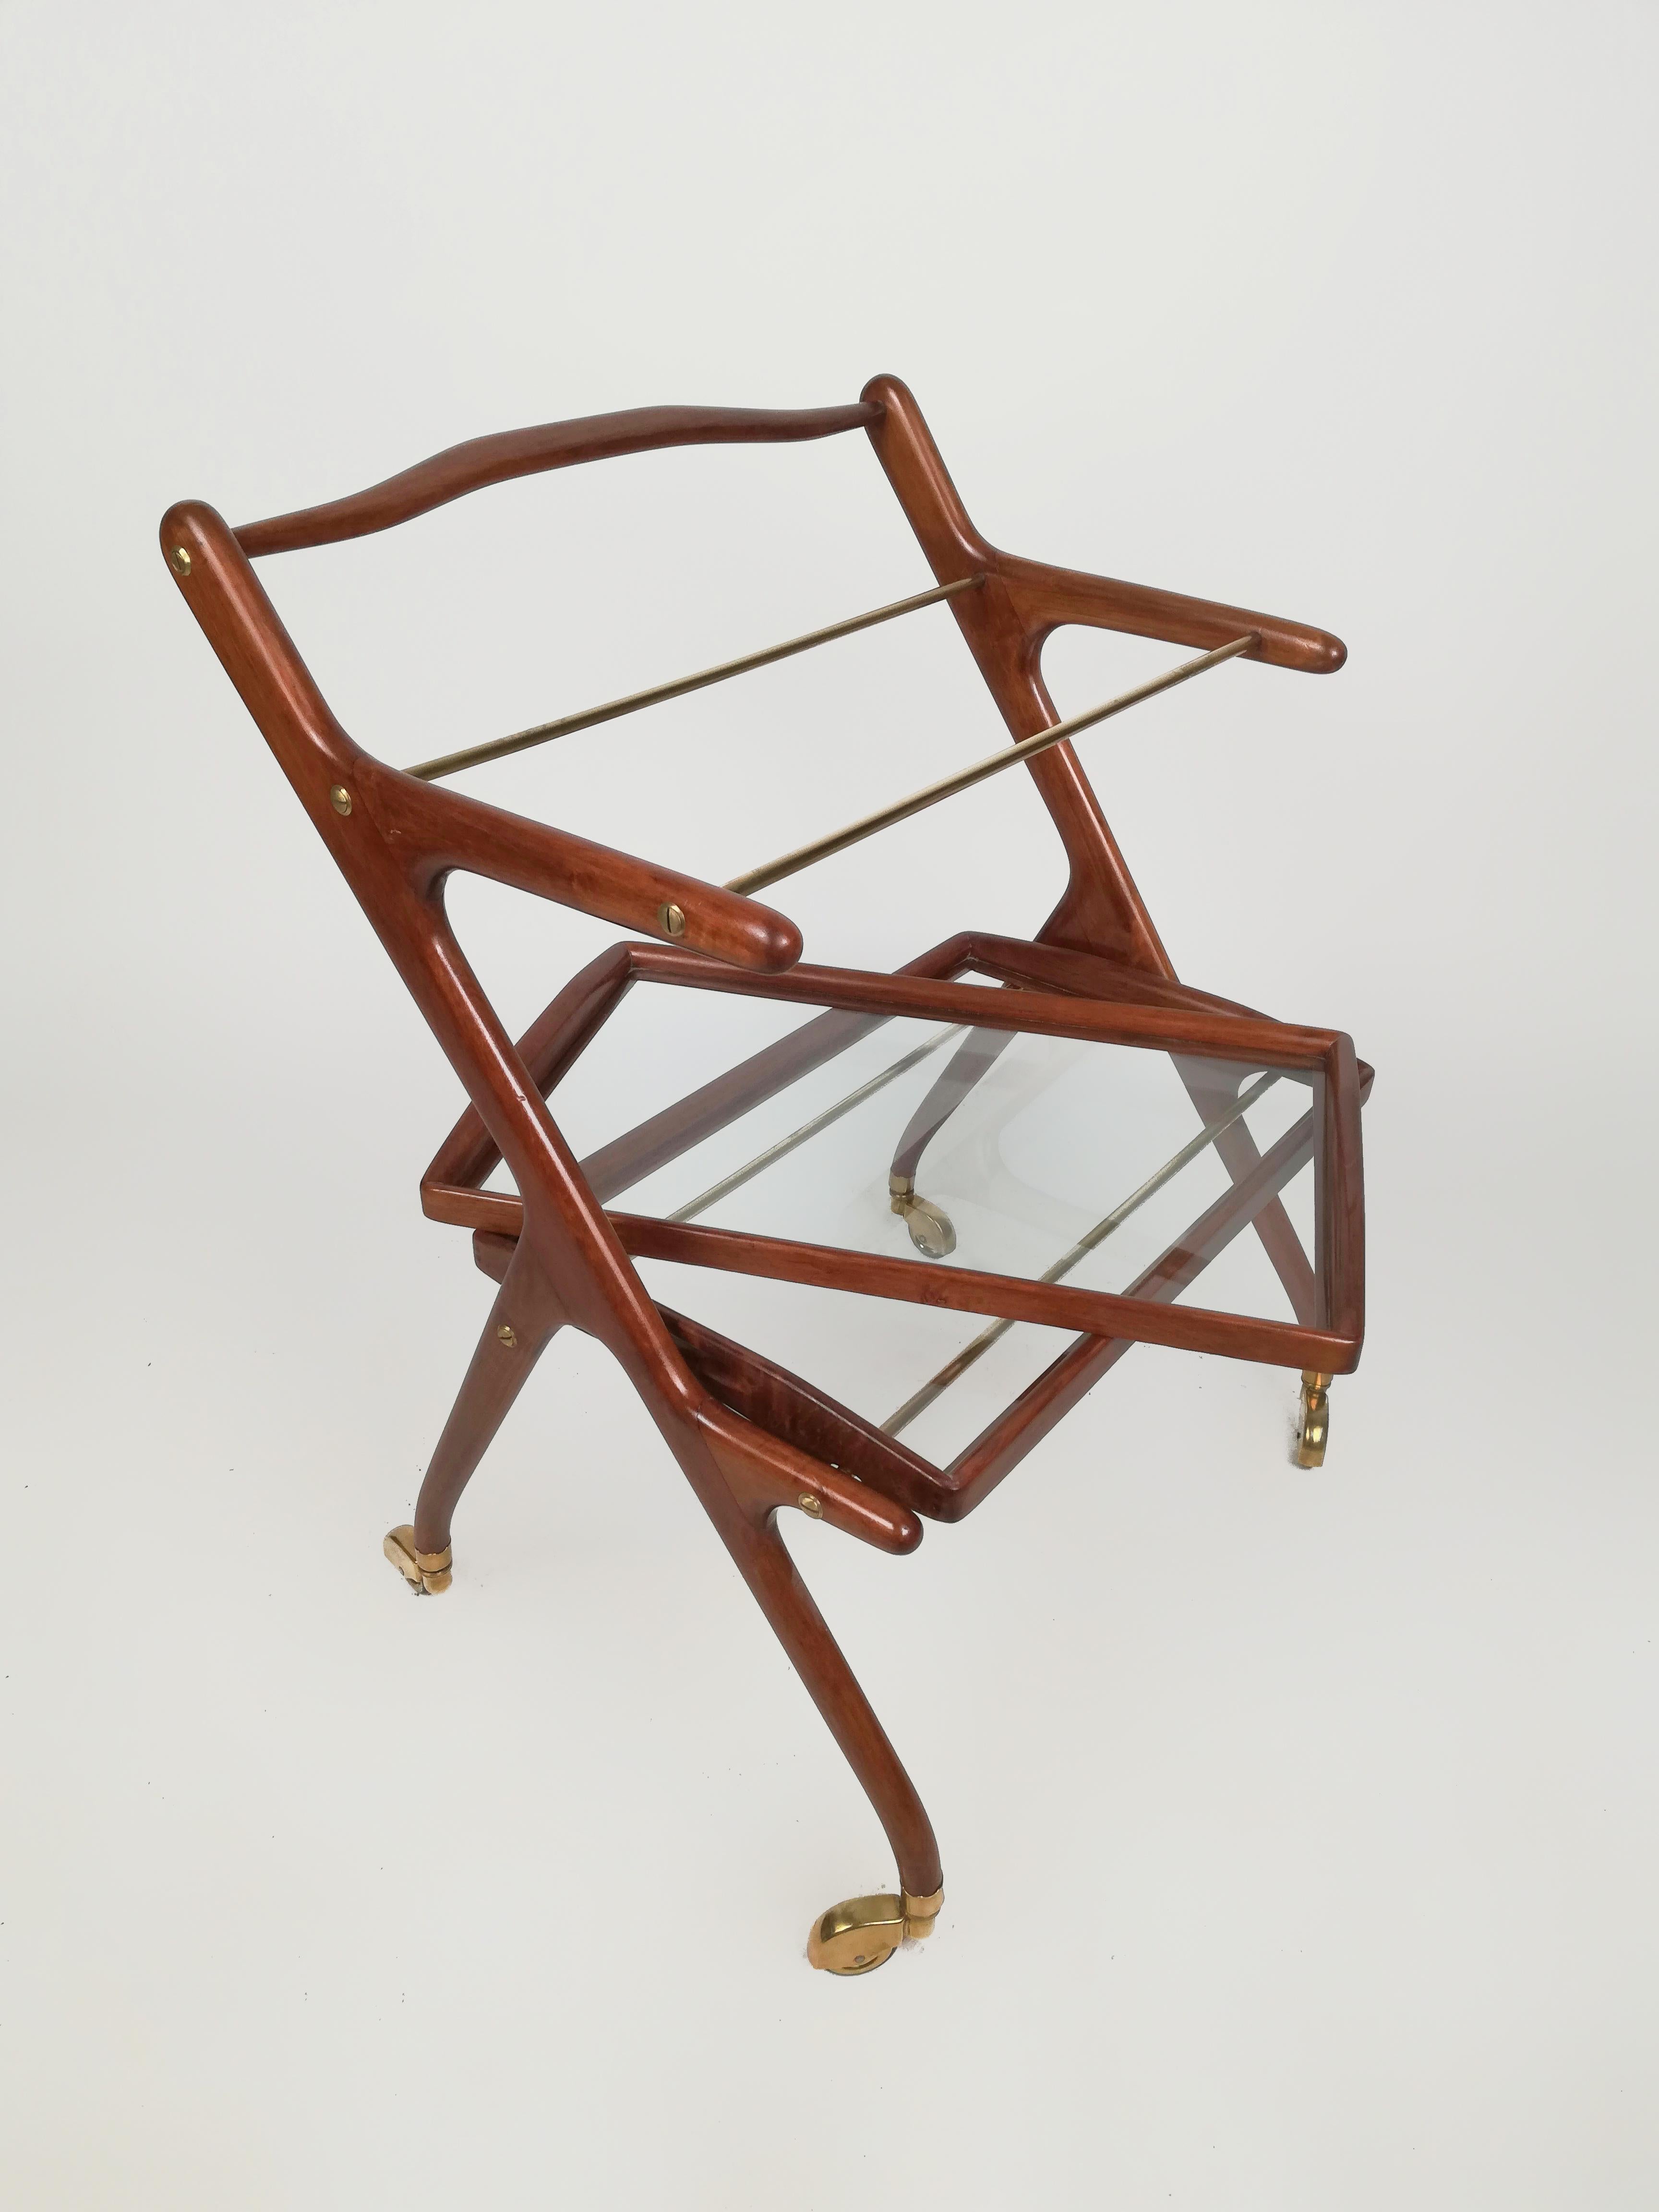 A trolley bar cart in the typical Italian style of the Mid-Century Modern Design.
The design of this Bar Trolley is attributed to Cesare Lacca for the famous Italian furniture company Cassina.
Inside the thin and light walnut-colored structure